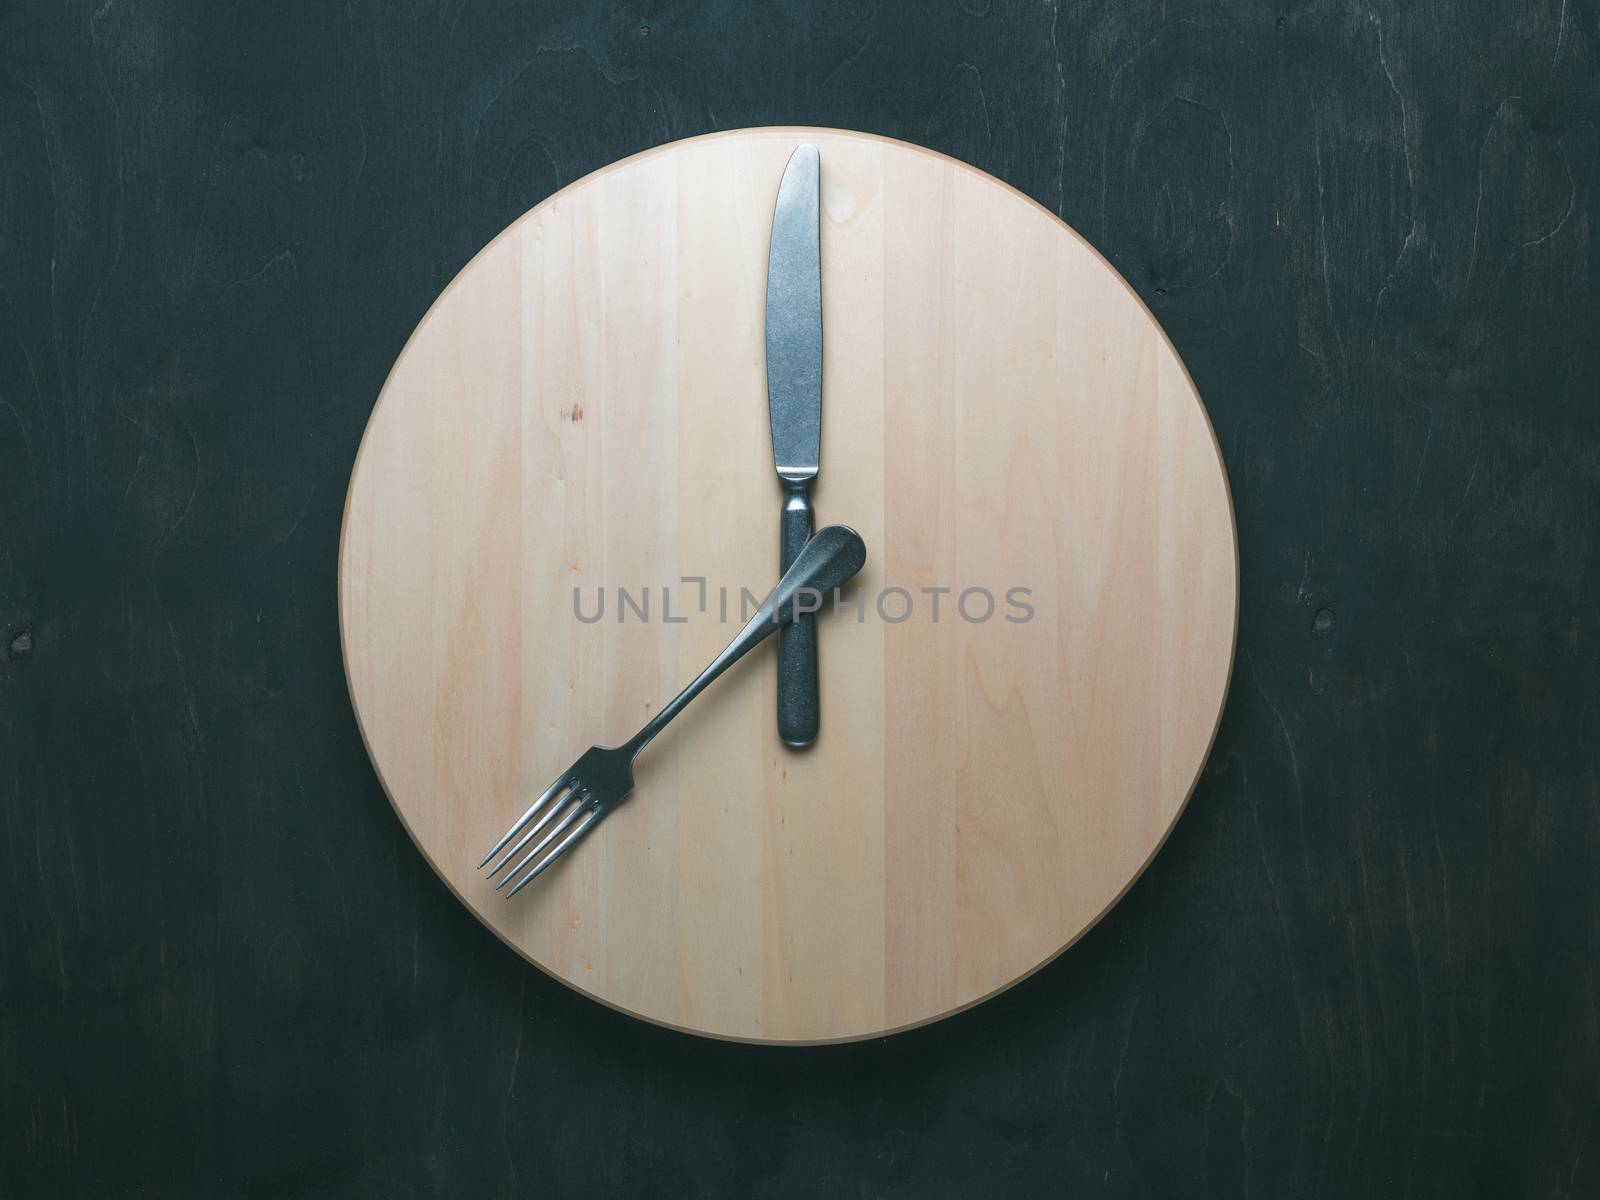 Intermittent fasting and skip breakfast concept - empty wooden round tray or trencher with cutlery as clock hands on dark background. Eight hour feeding window concept or breakfast time concept